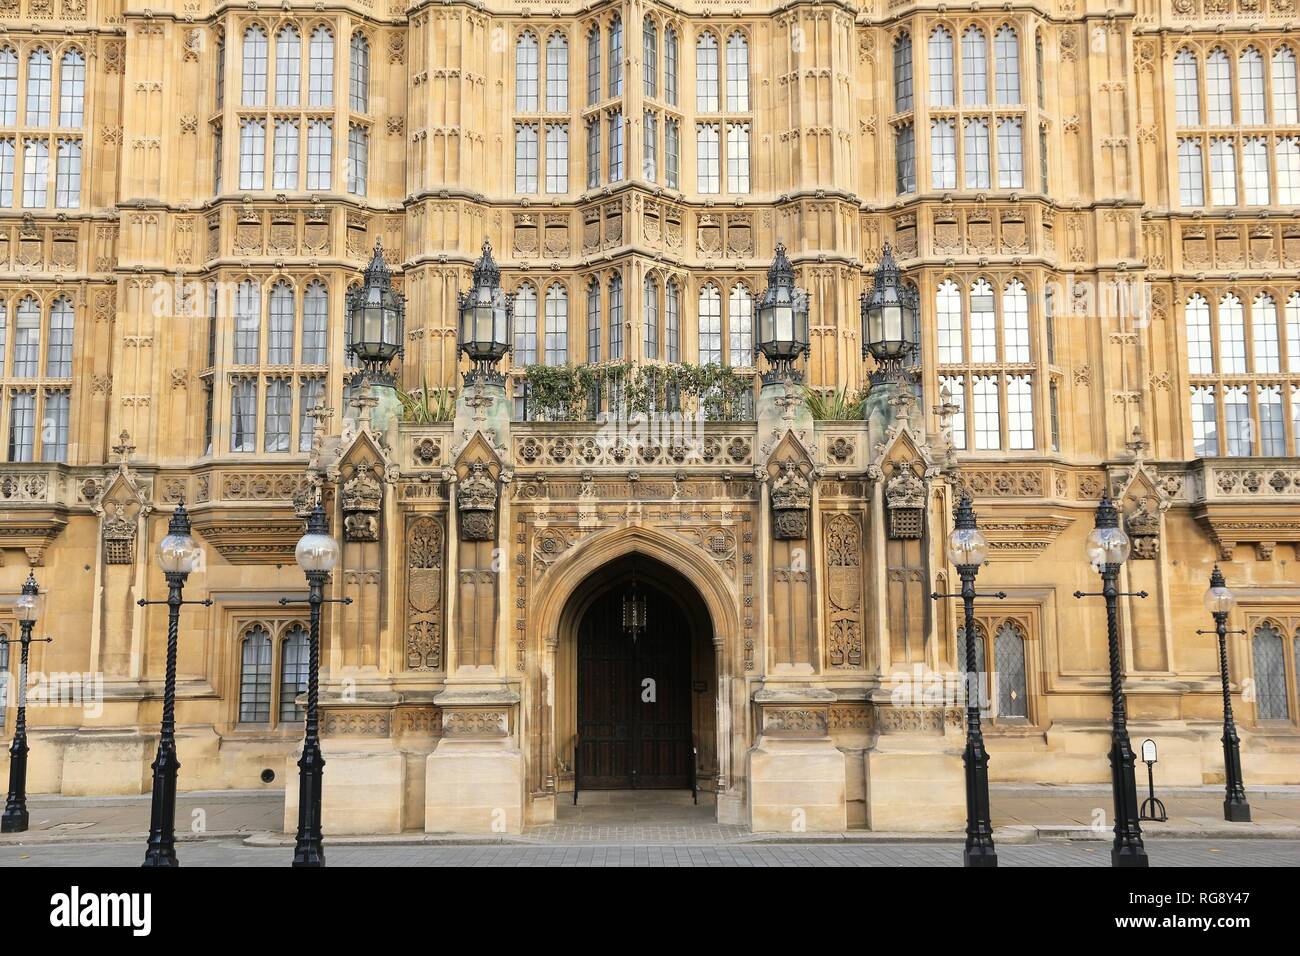 London, England - Palace of Westminster (Houses of Parliament). Stock Photo